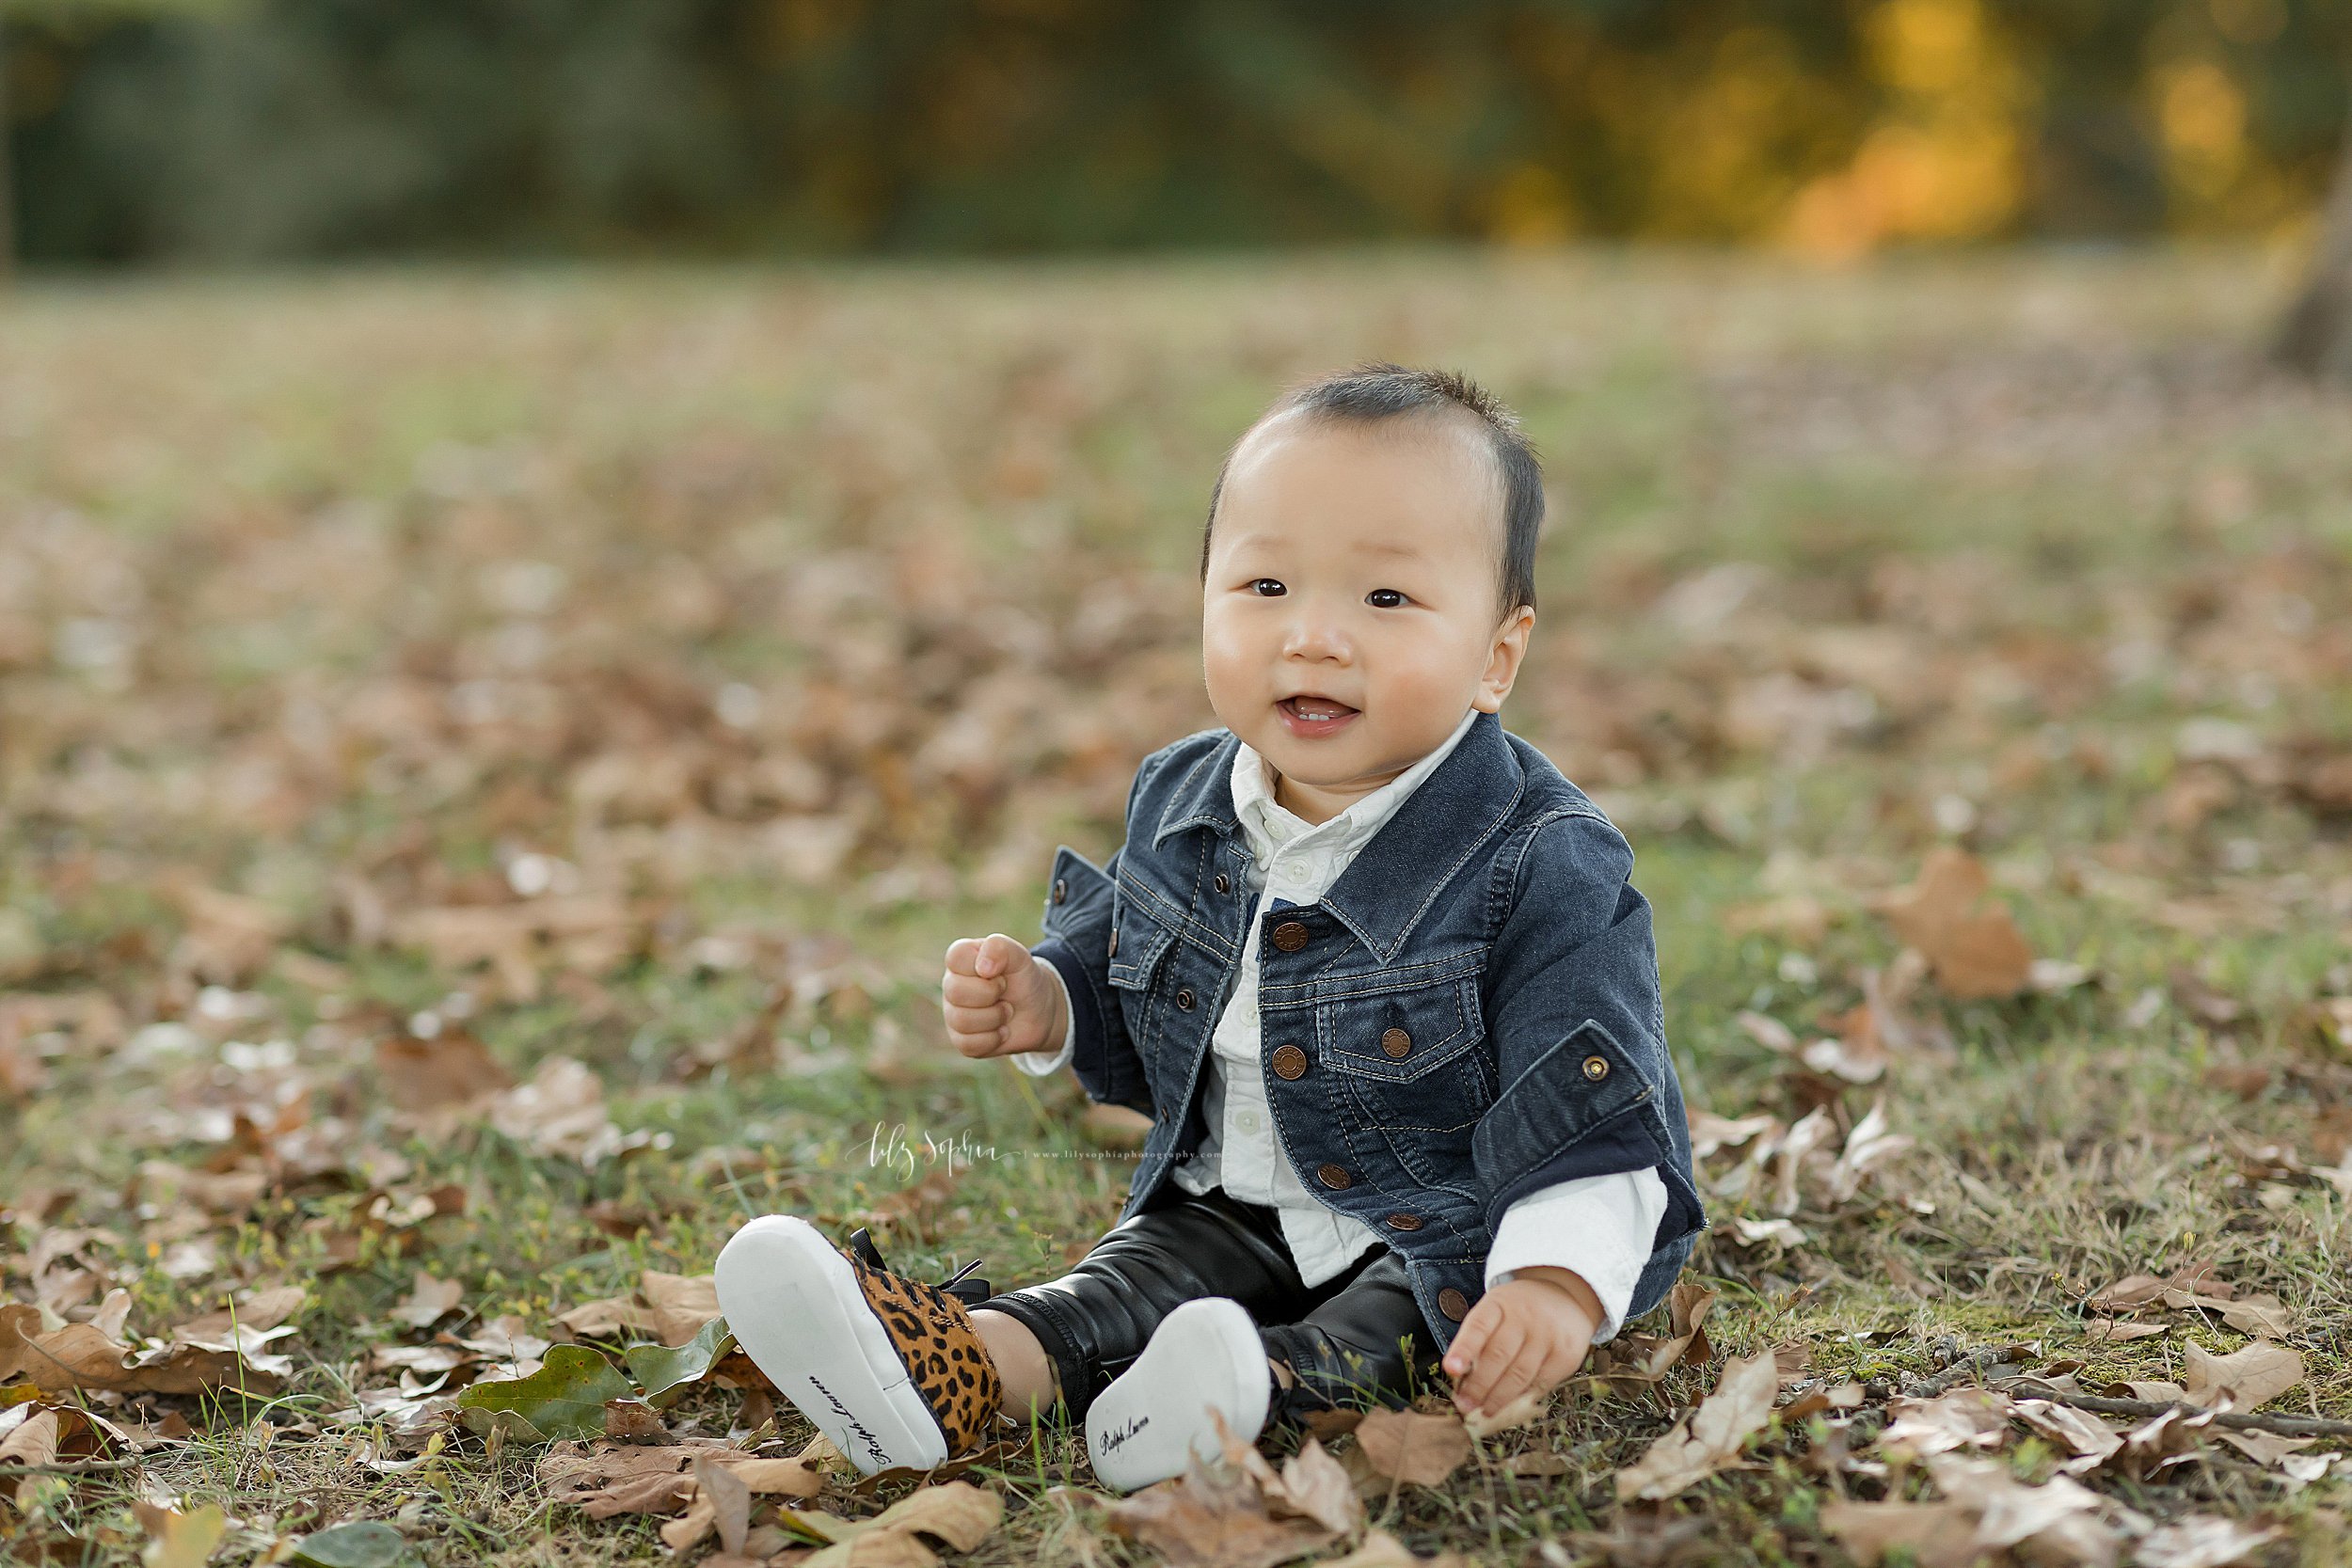 atlanta-buckhead-brookhaven-decatur-lily-sophia-photography--photographer-portraits-grant-park-intown-park-sunset-first-birthday-cake-smash-one-year-old-outdoors-cool-asian-american-family_0081.jpg